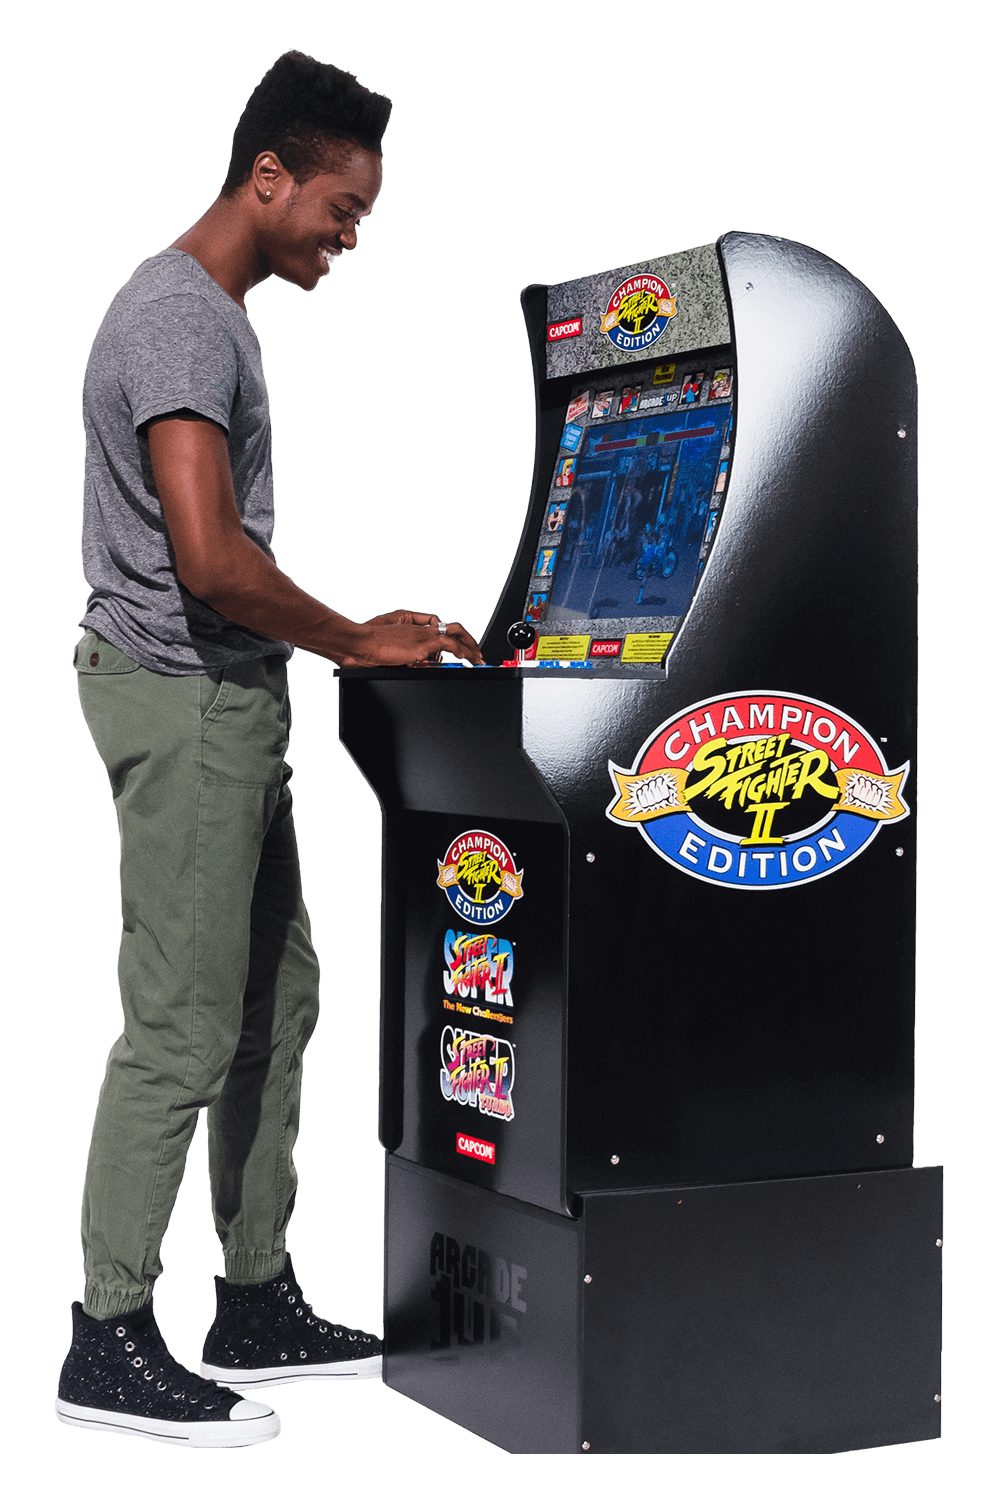 Arcade1up Officially Licensed Arcade Cabinets